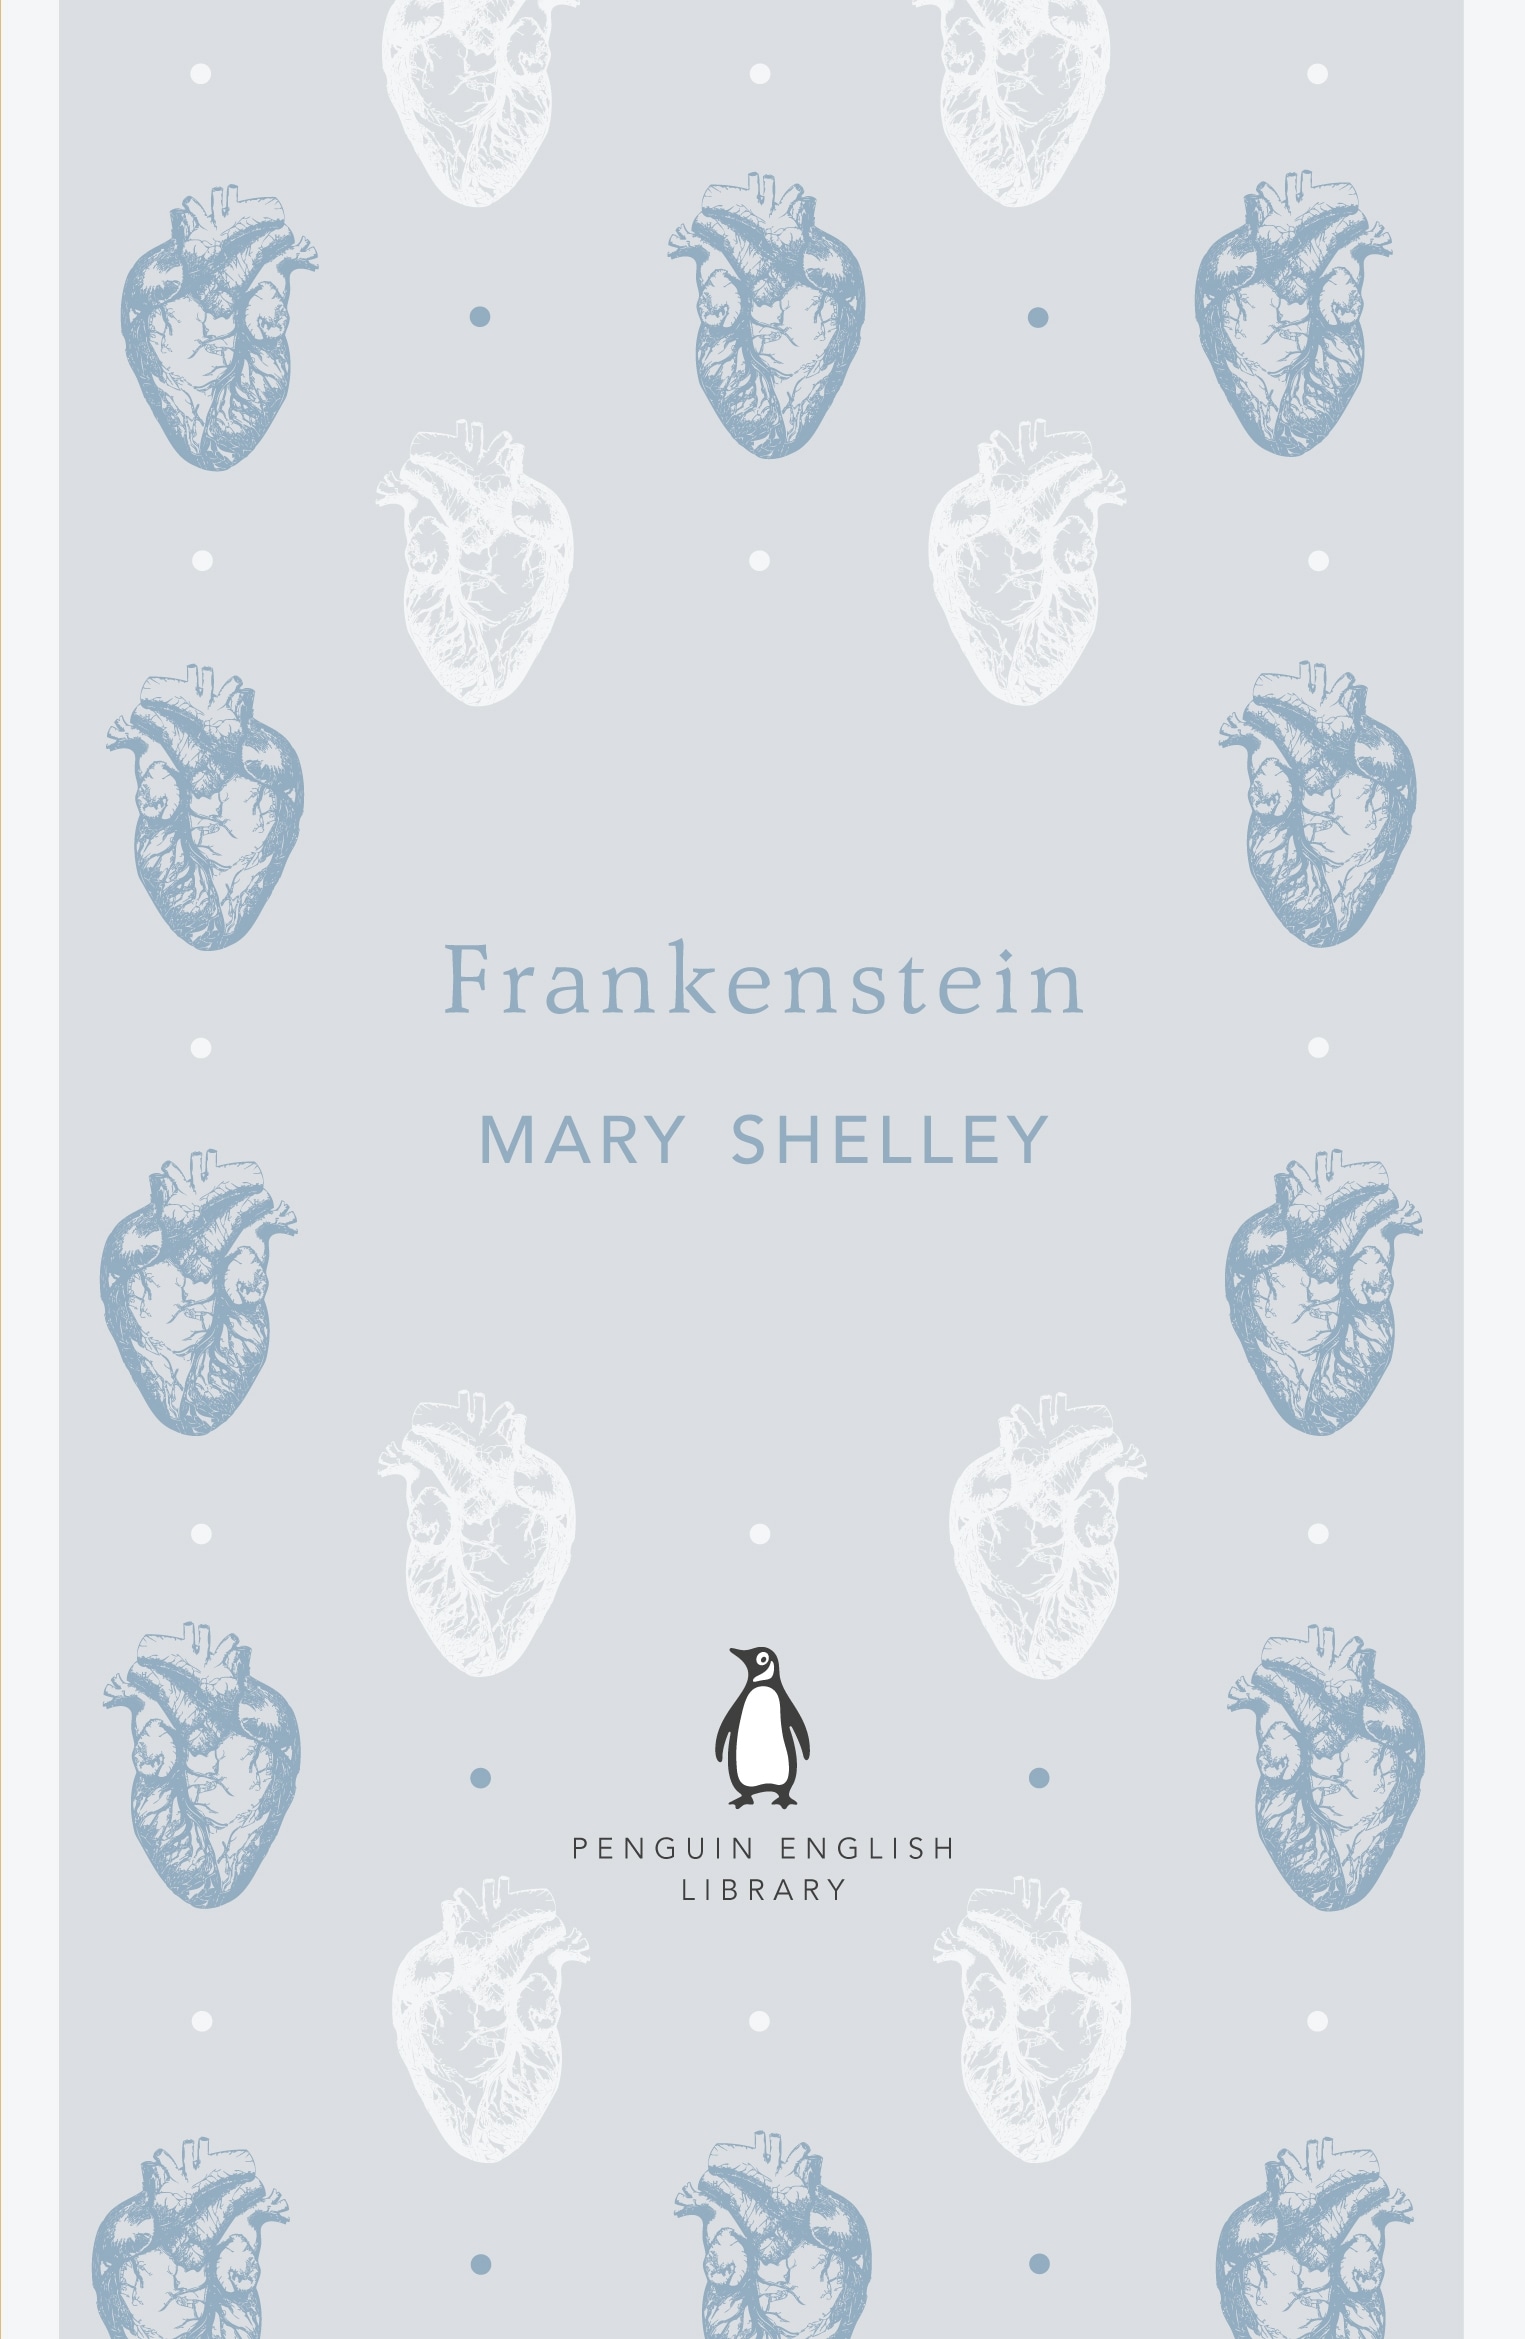 Book “Frankenstein” by Mary Shelley — April 26, 2012